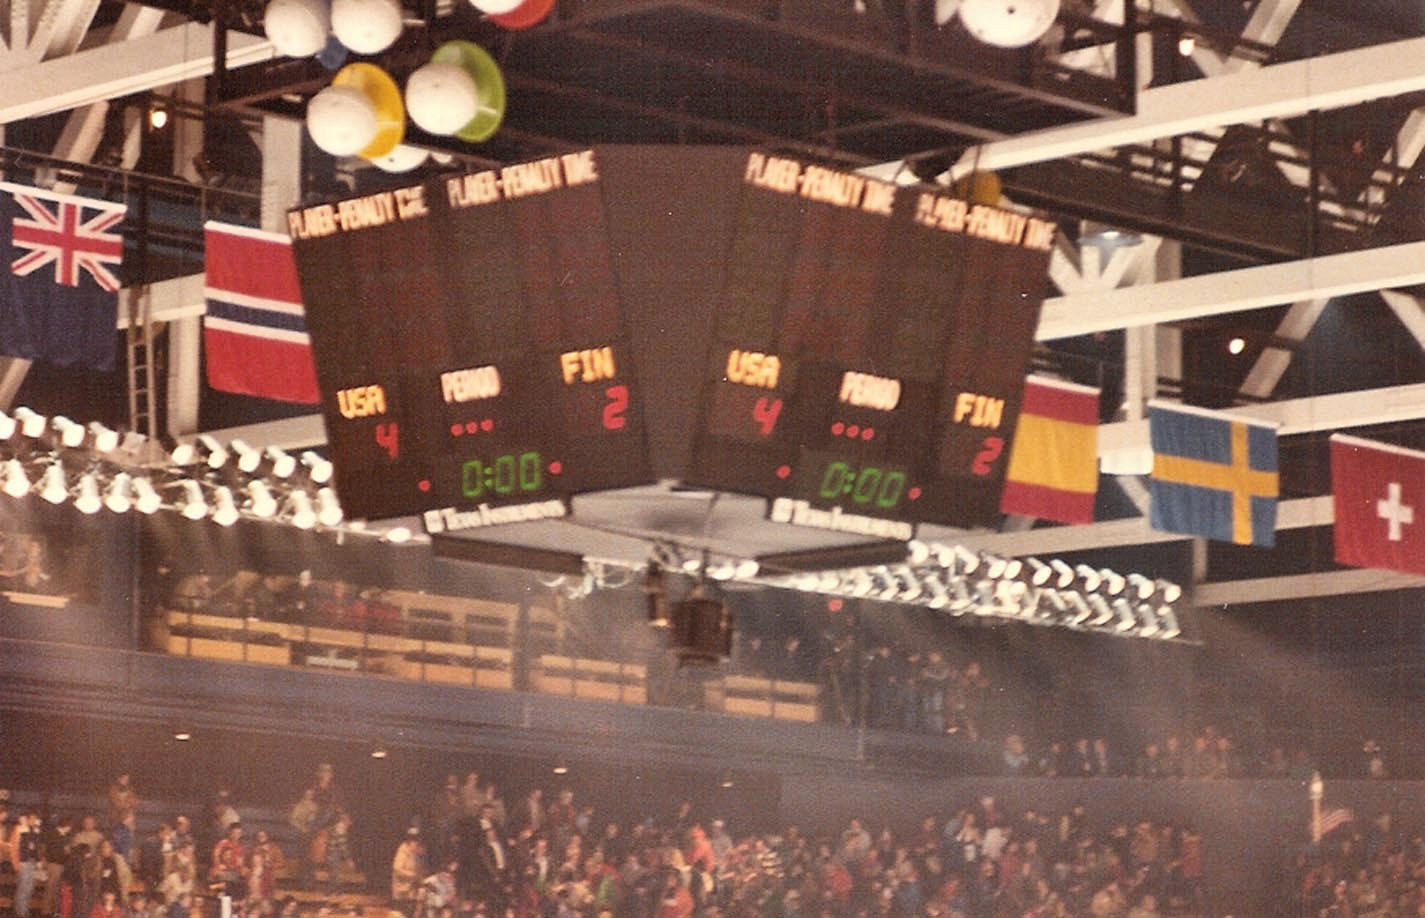 The scoreboard that recorded the United States' famous victory over the Soviet Union in the "Miracle on Ice" at the 1980 Winter Olympics in Lake Placid is to be housed in the new US Olympic Museum in Colorado Springs ©Twitter